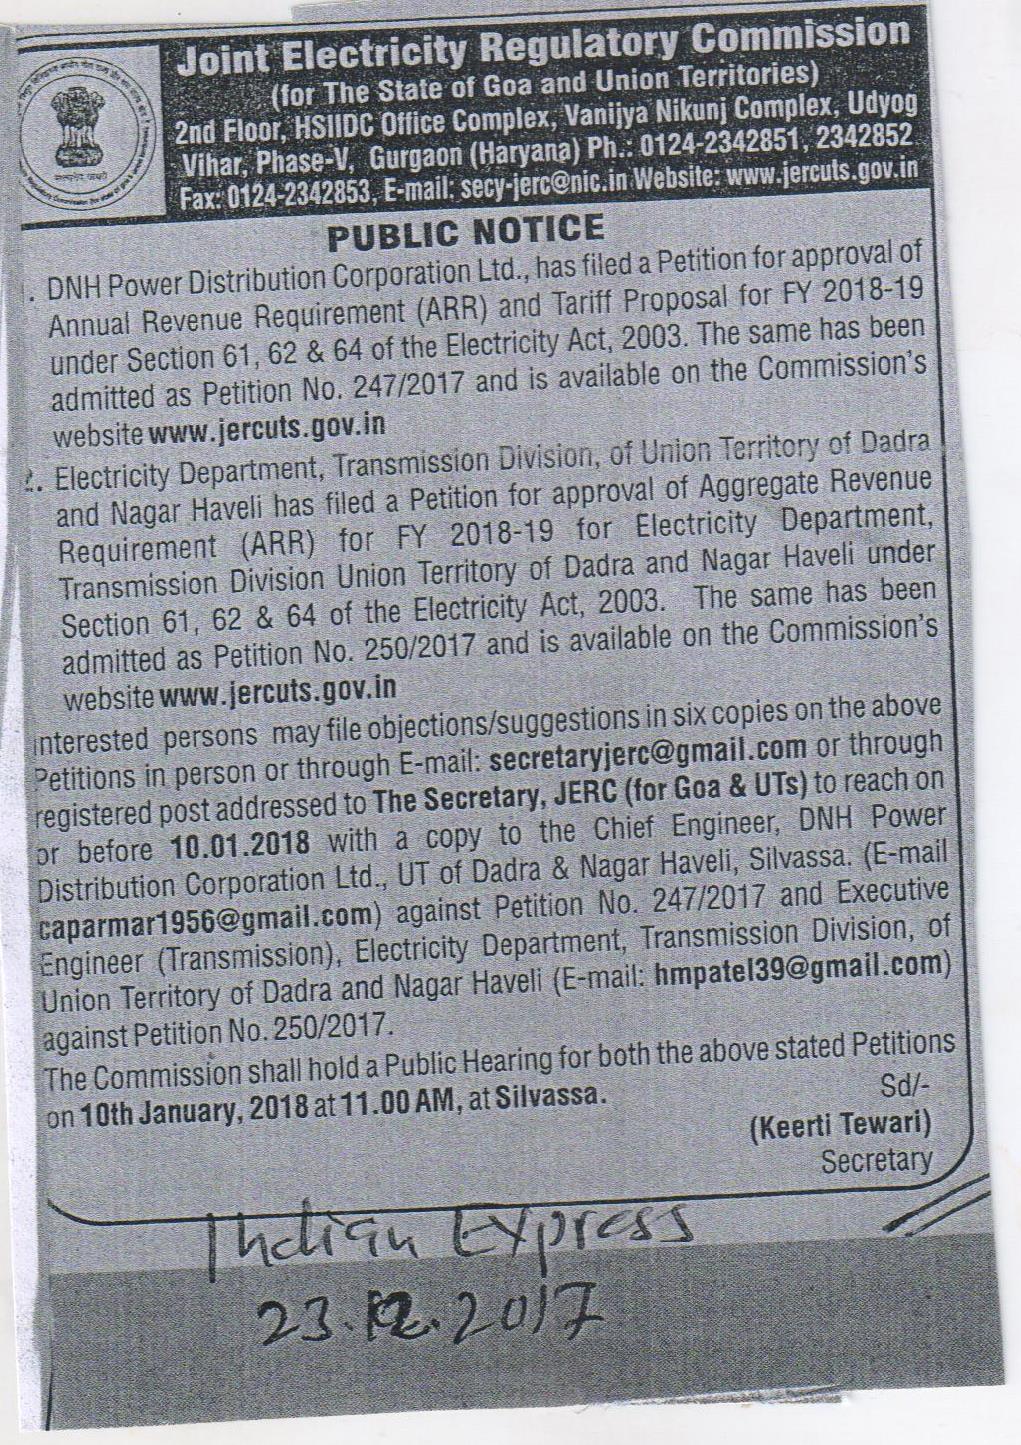 Annexure 2-Public notices published by the Commission True-up of FY 2014-15, FY